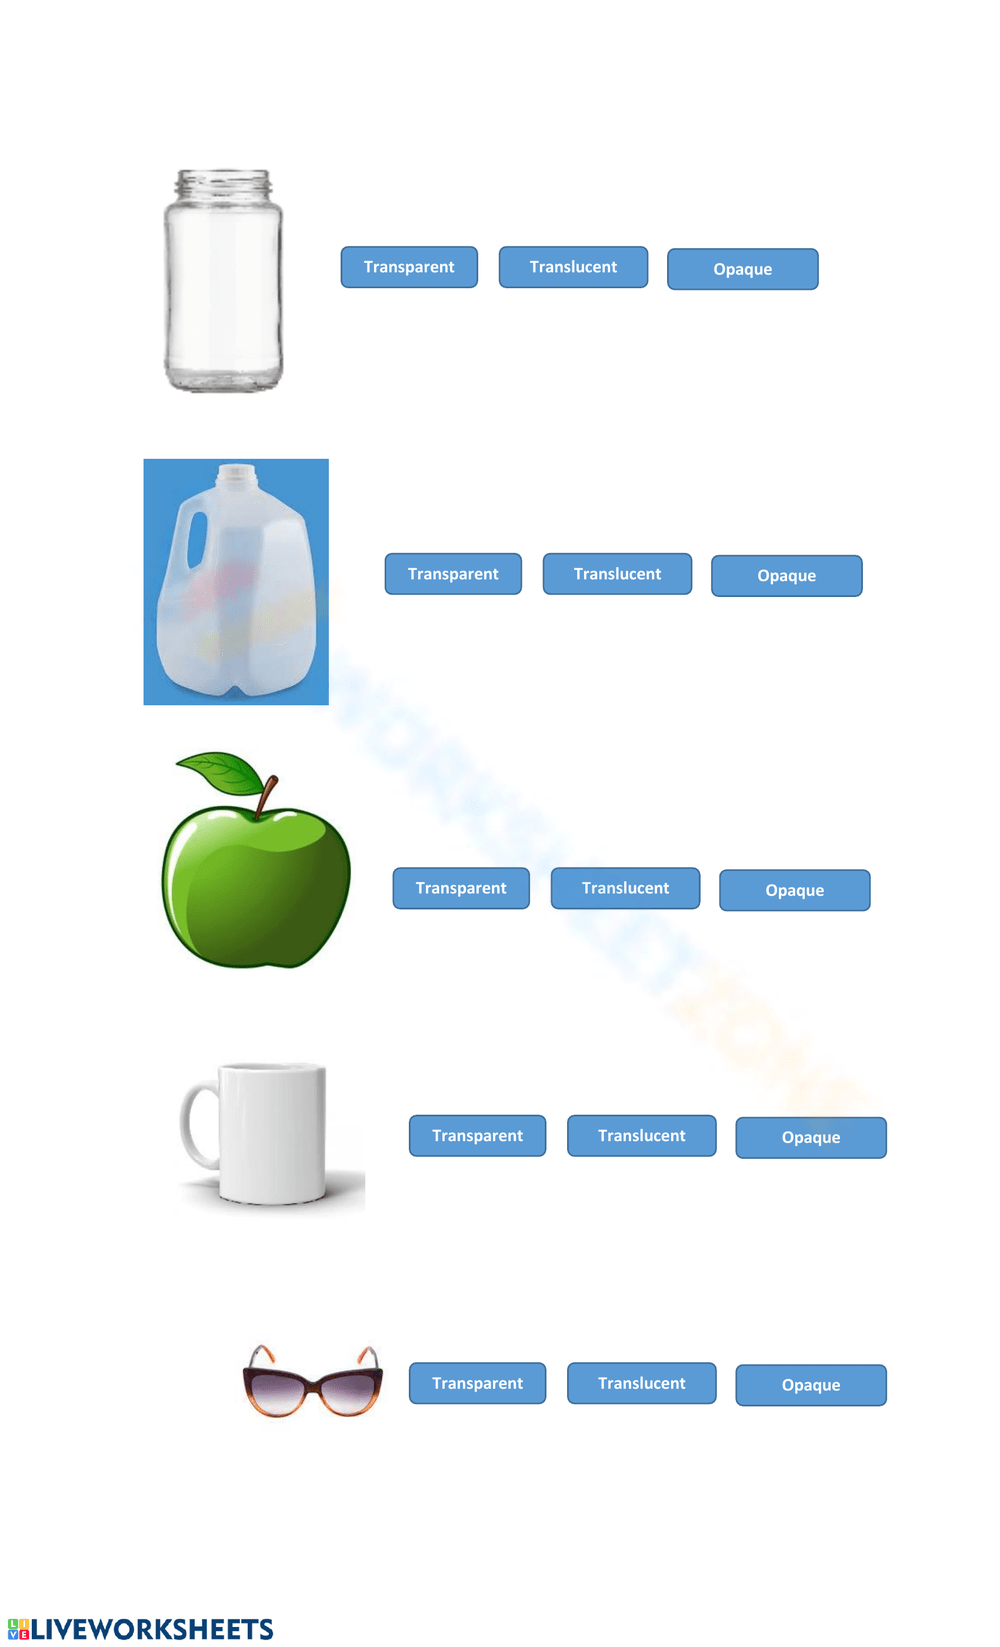 Transparent, translucent, opaque object sorting